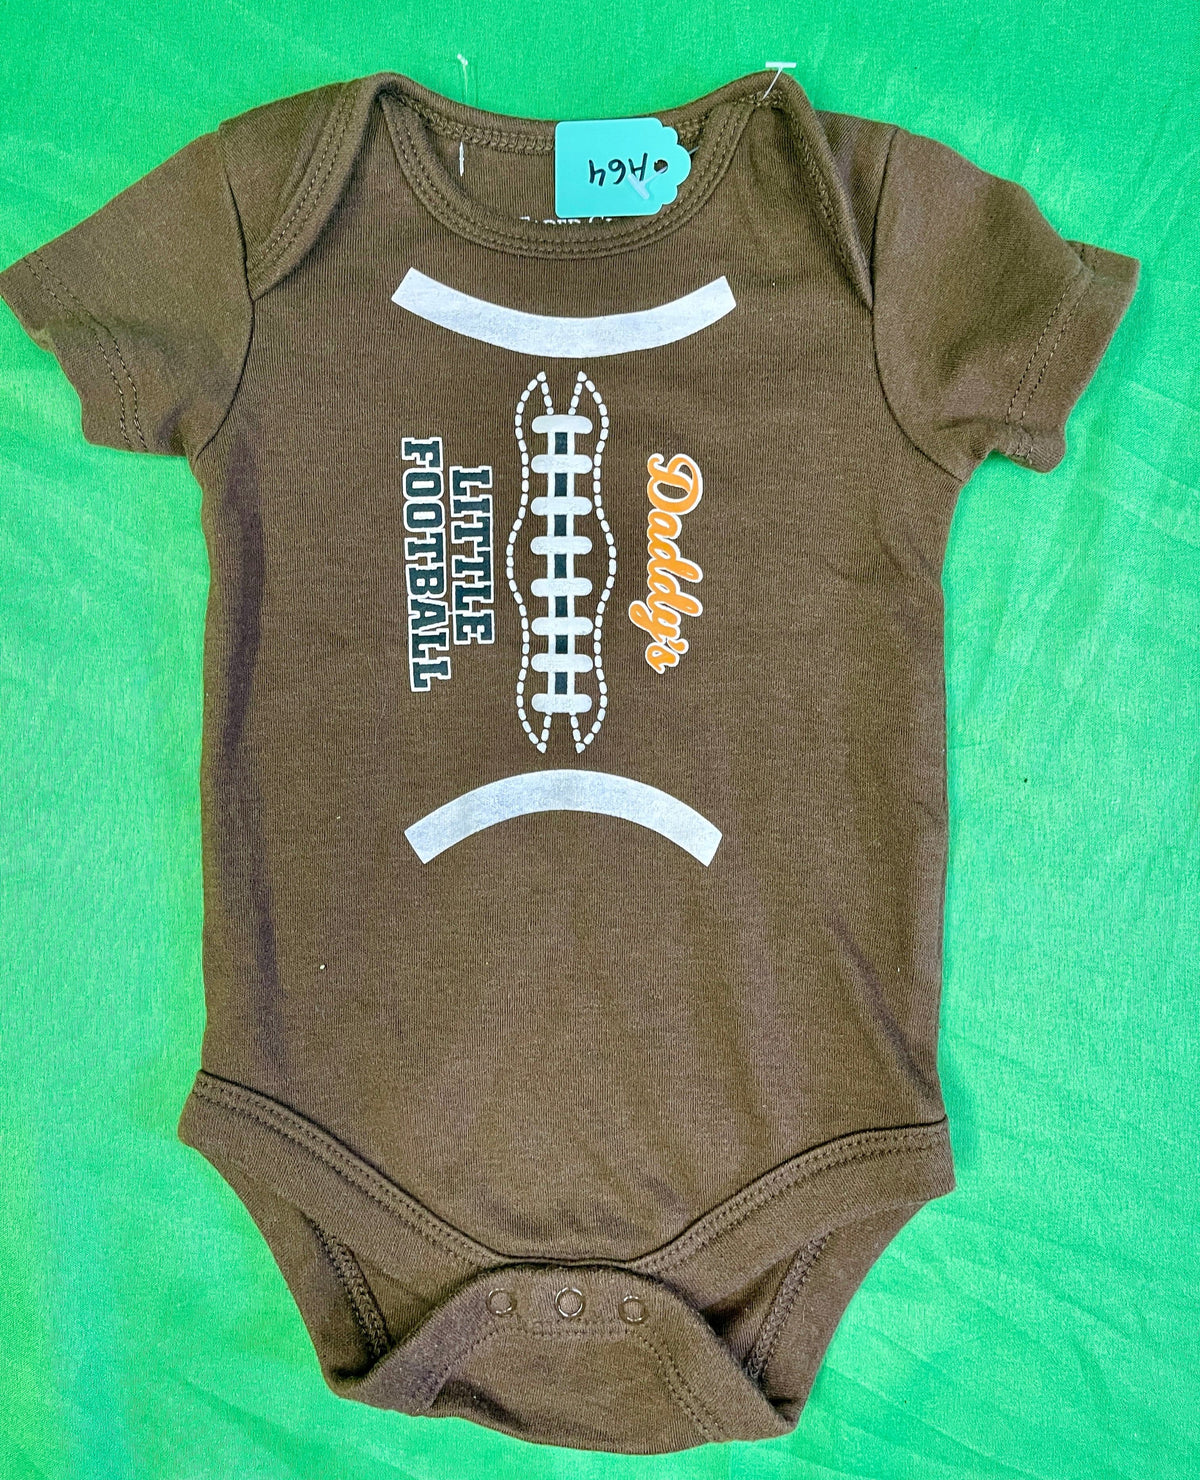 American Football "Daddy's Little Football" Bodysuit/Vest Infant Baby 0-3 Months